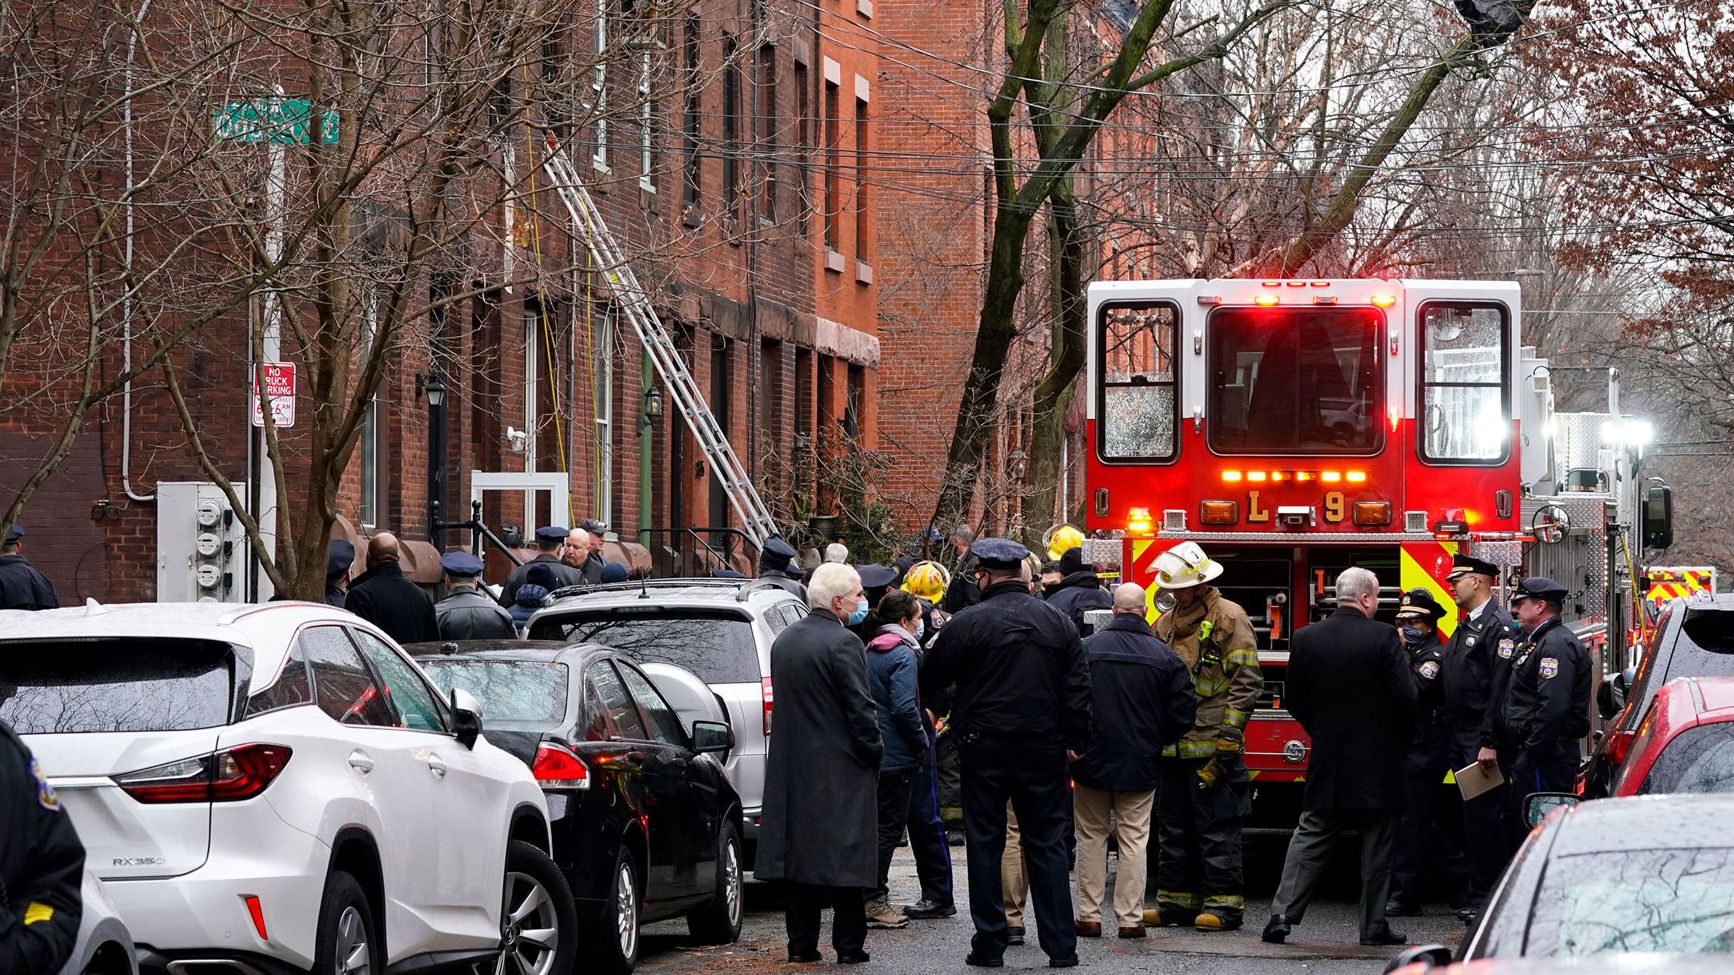 Philadelphia firefighters work at the scene of a deadly row house fire Wednesday in the neighborhood of Fairmount.